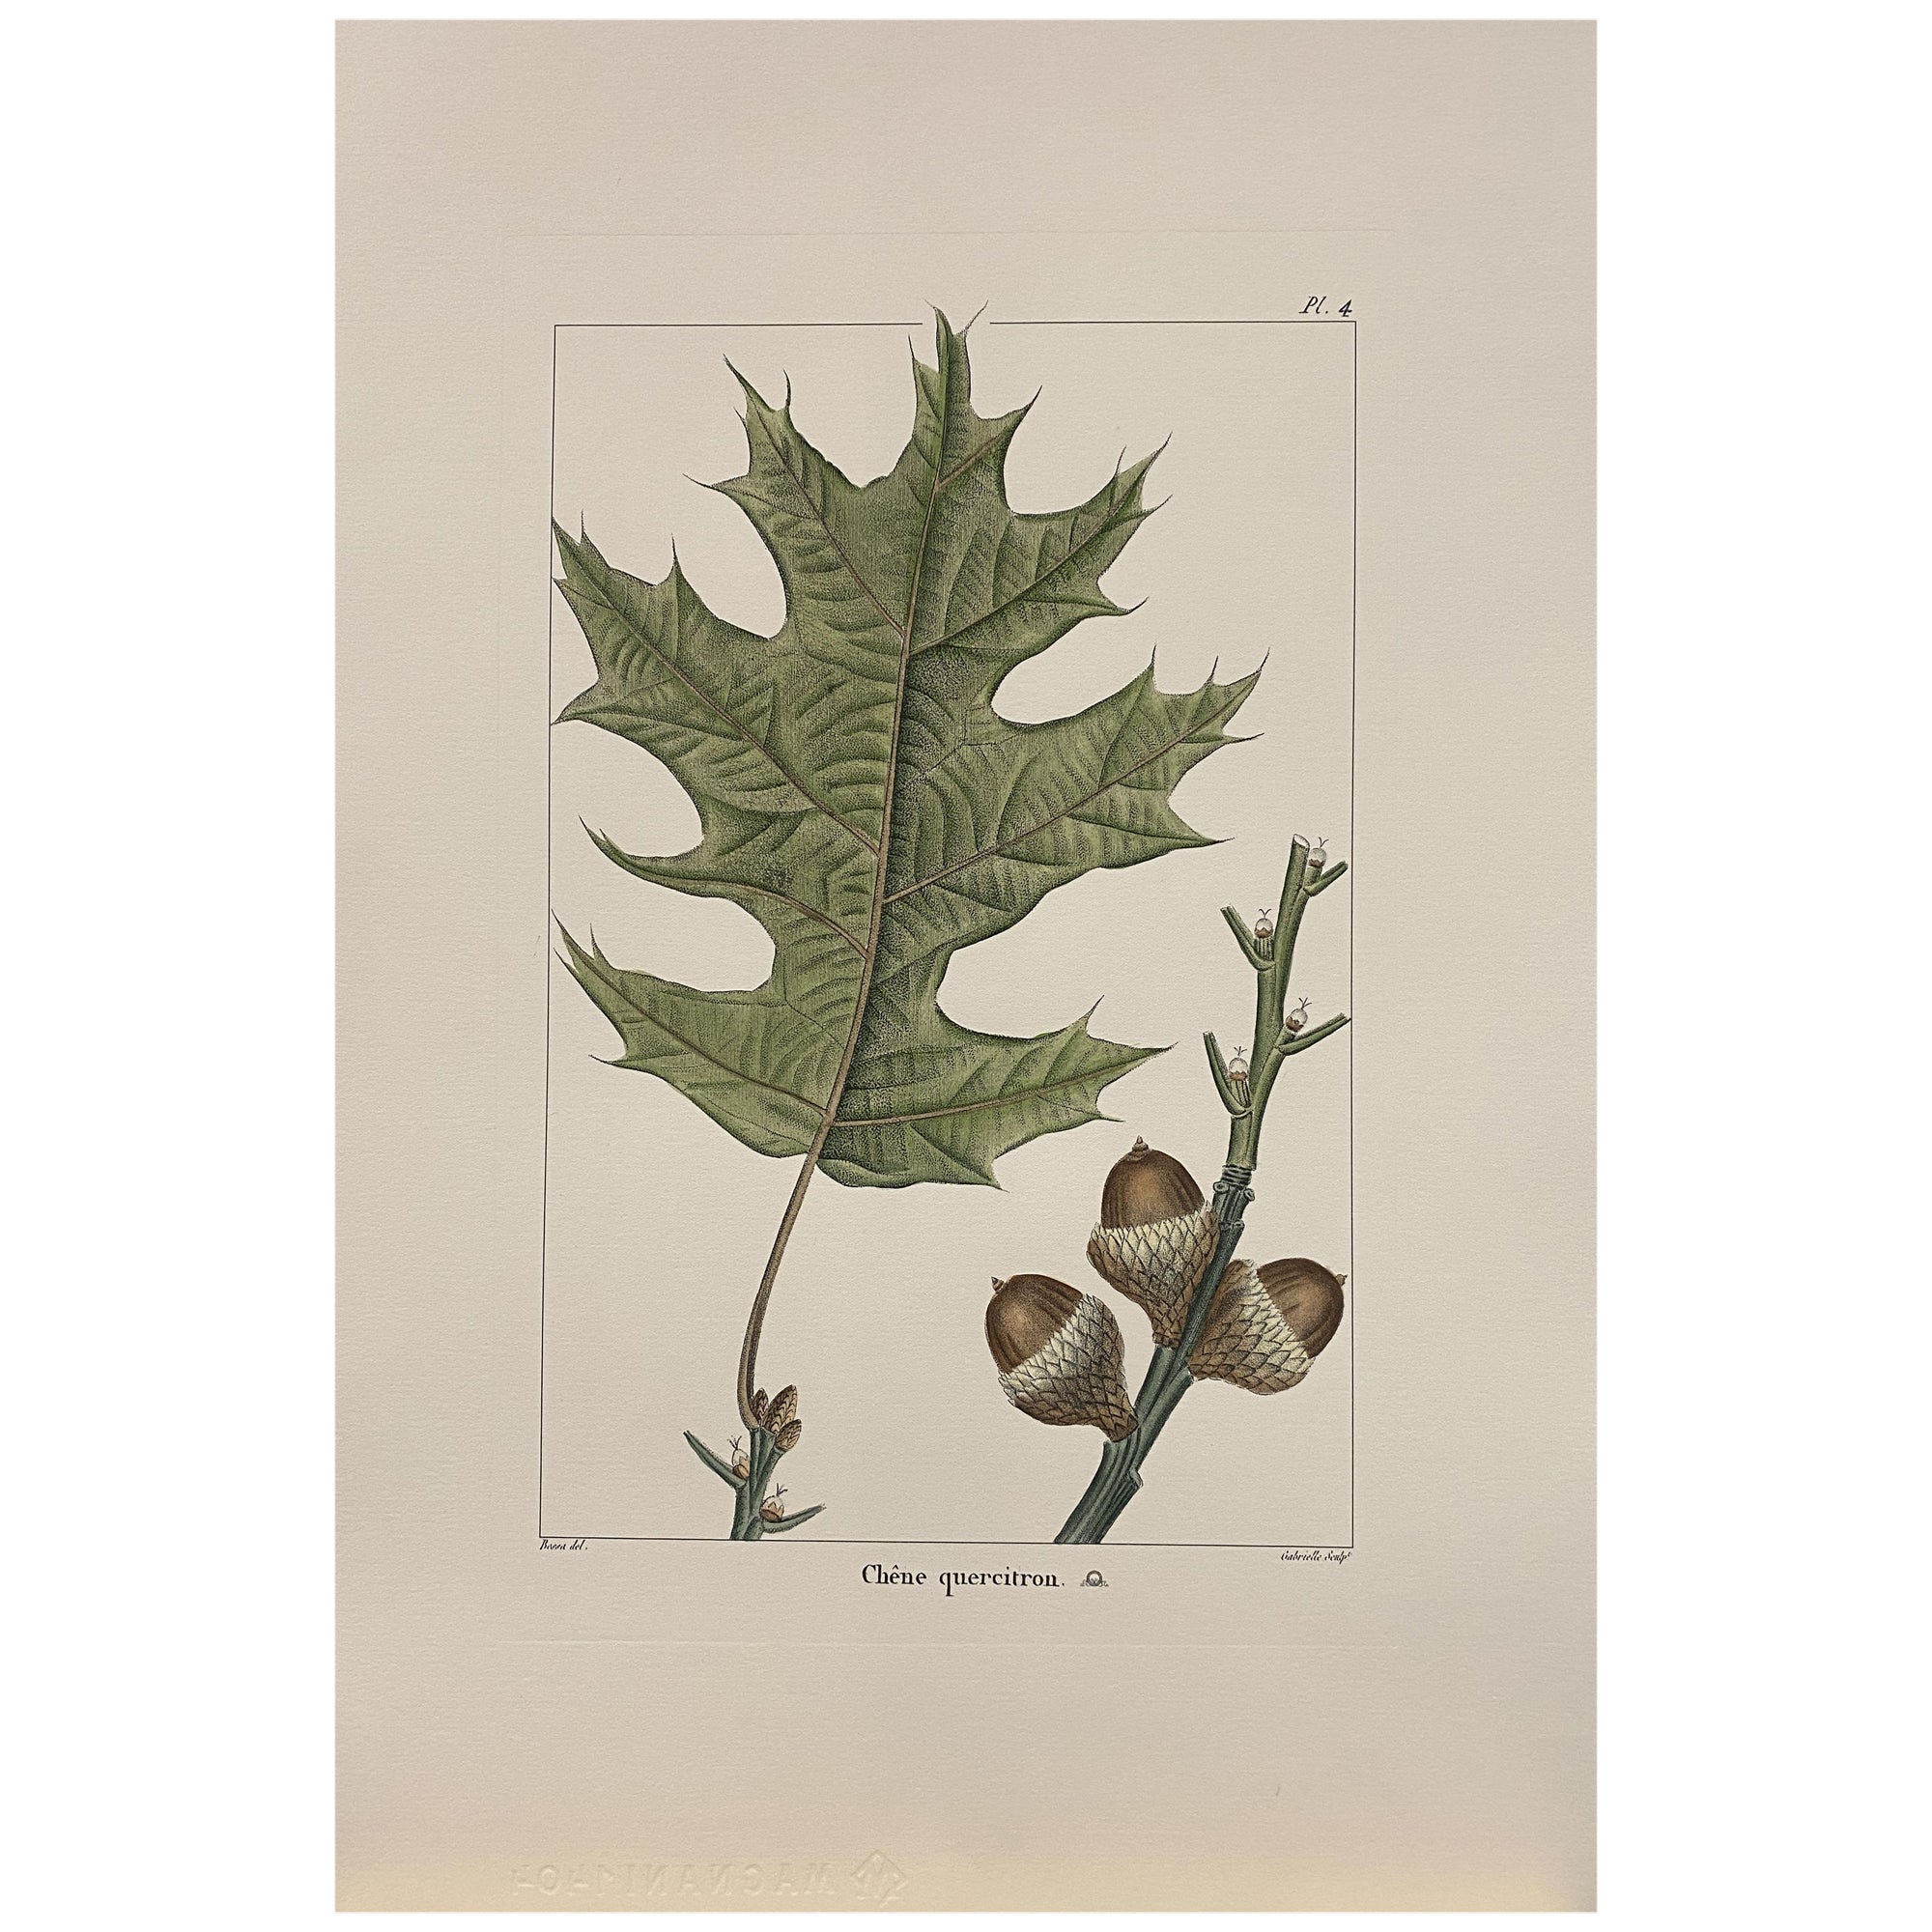 Italian Contemporary Hand Painted Botanical Print "Chene Quercitron" 4 of 4